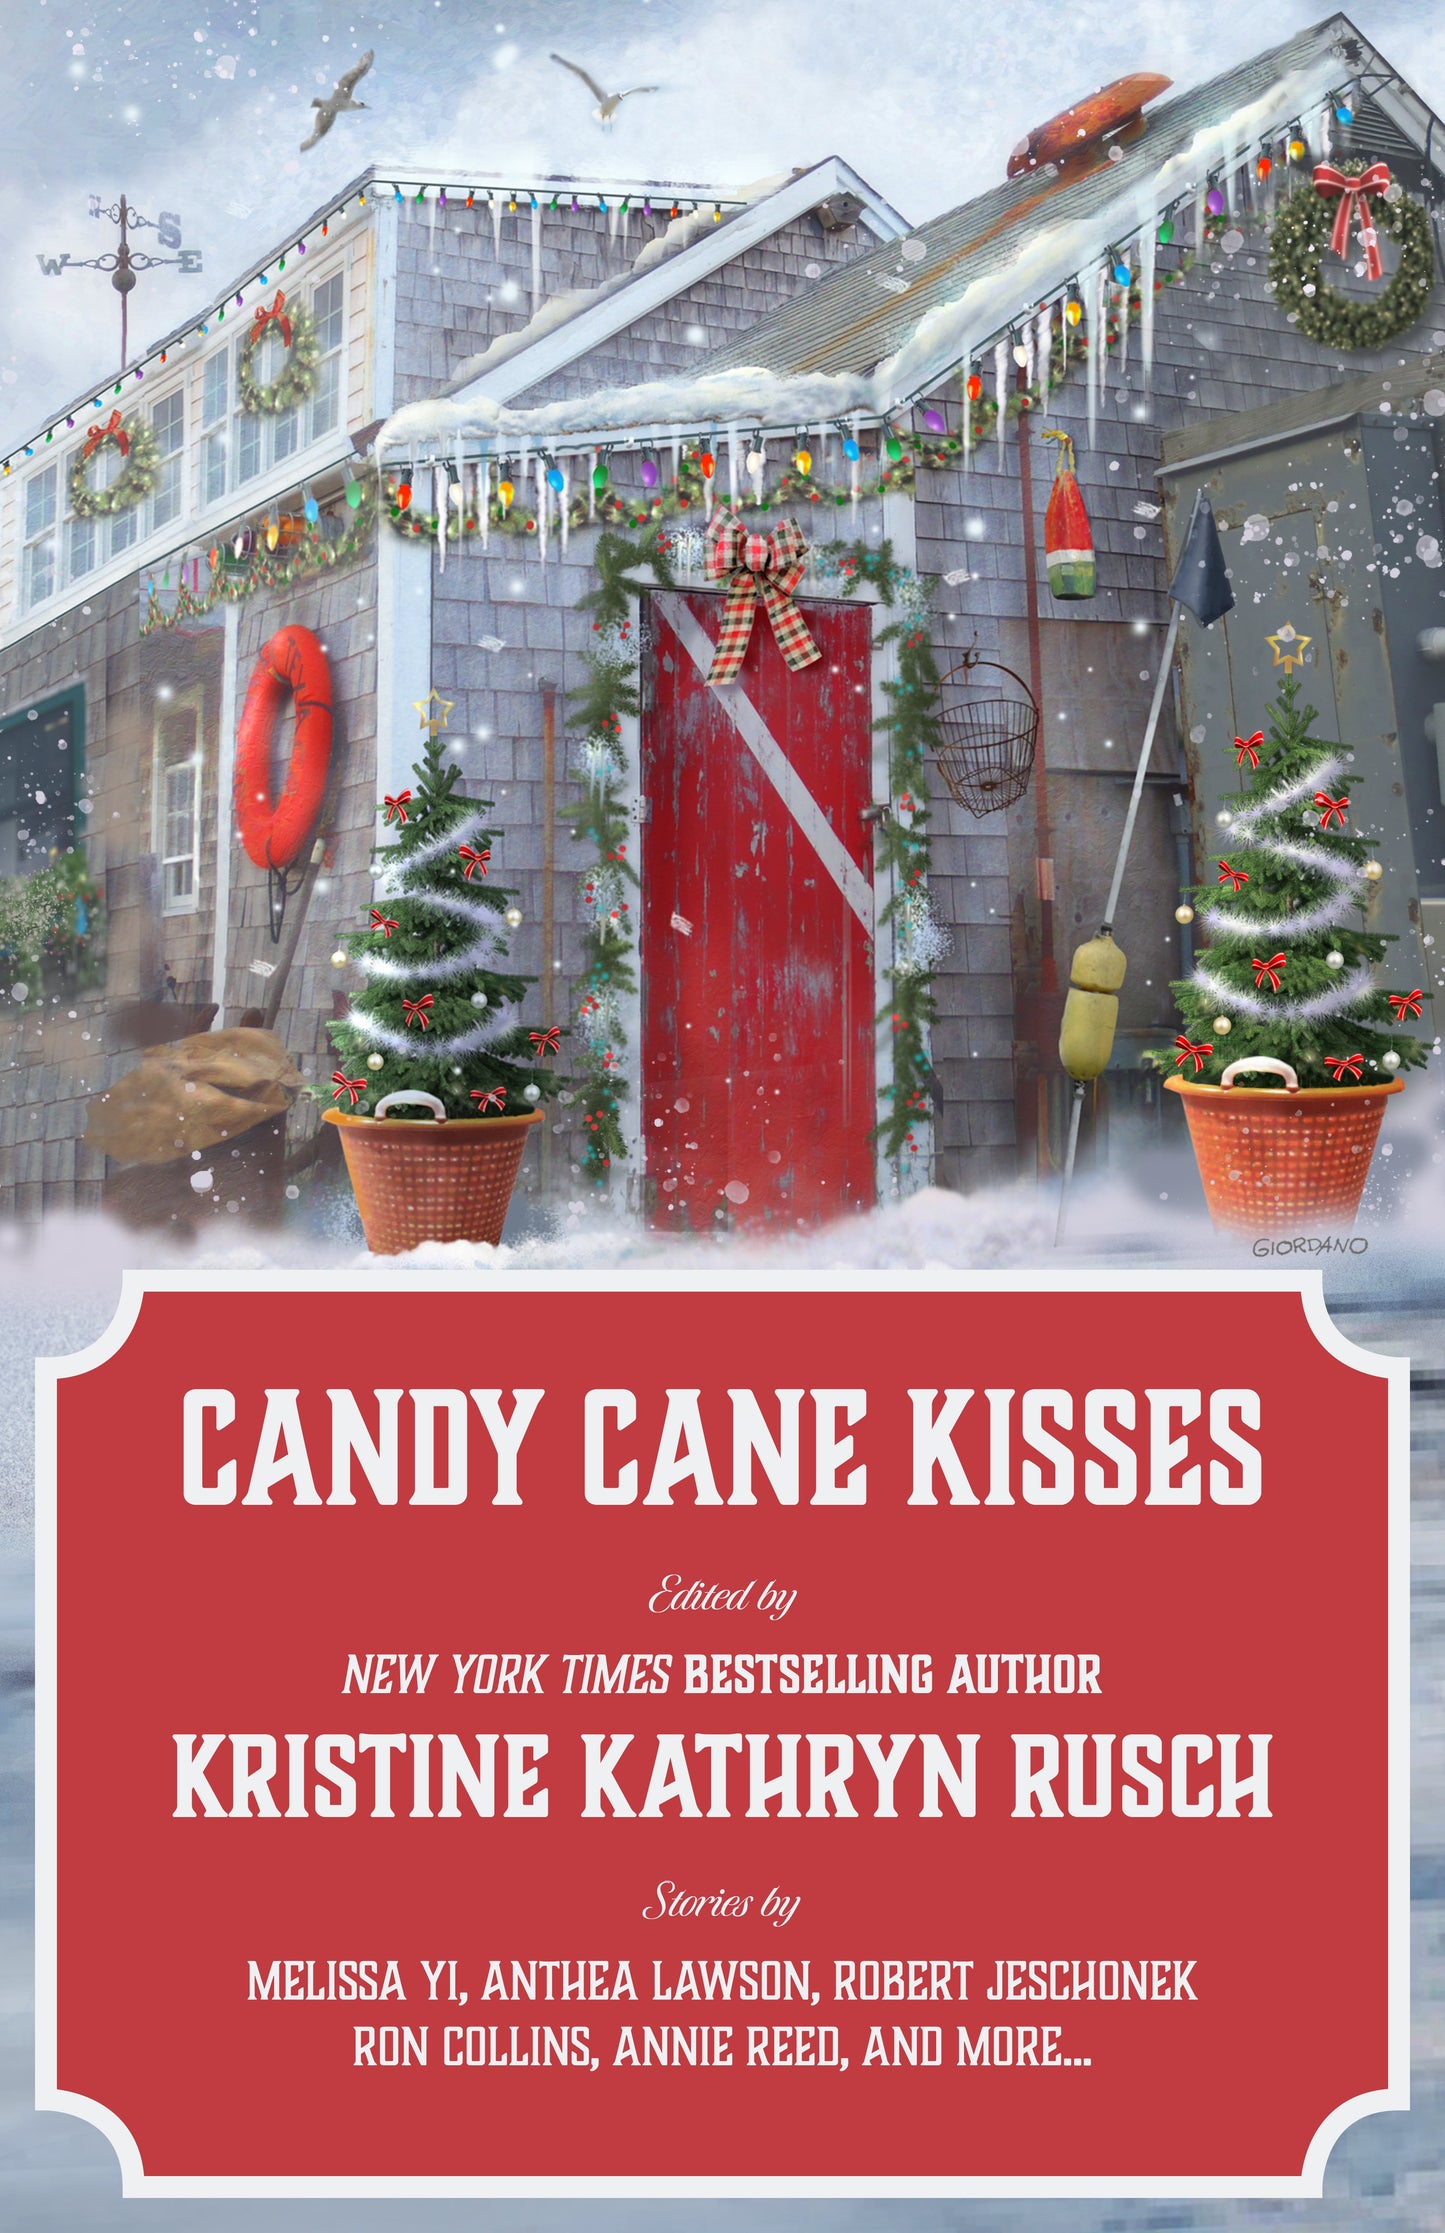 Candy Cane Kisses: A Holiday Anthology Edited by Kristine Kathryn Rusch